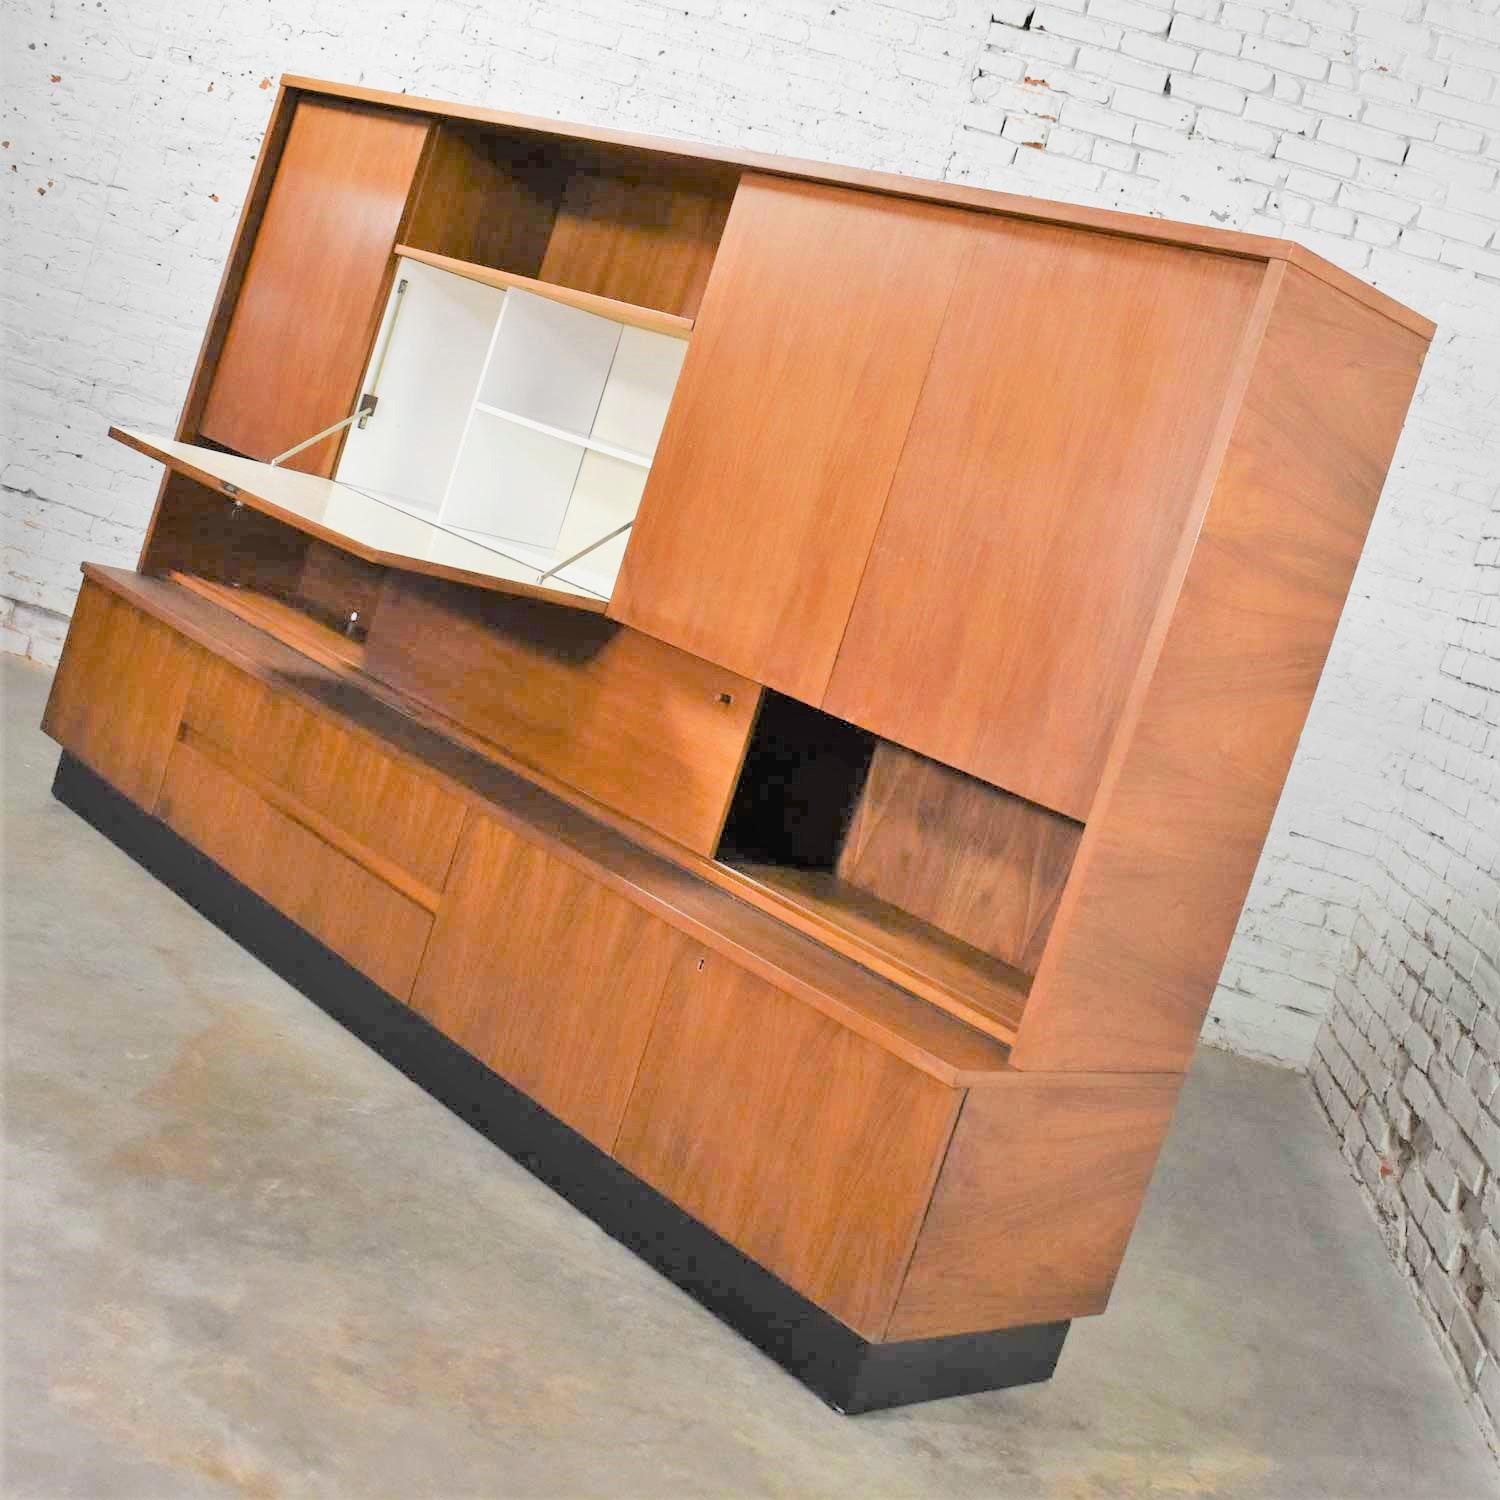 20th Century Teak Mid-Century Modern Wall Storage Bookcase Cabinet with Drop Front Desk For Sale